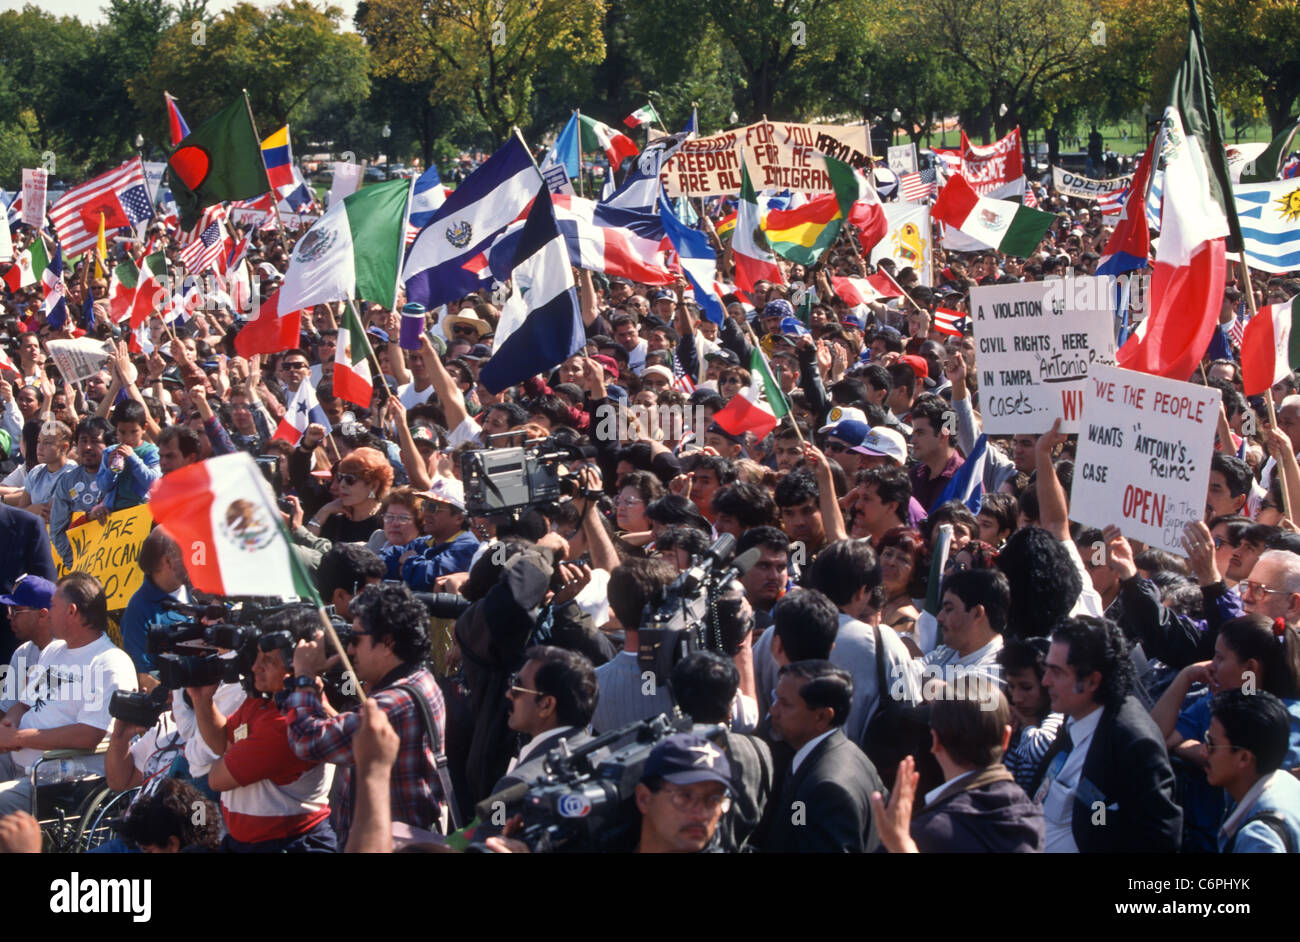 Thousands of Hispanic-Americans march demanding immigration reform Stock Photo